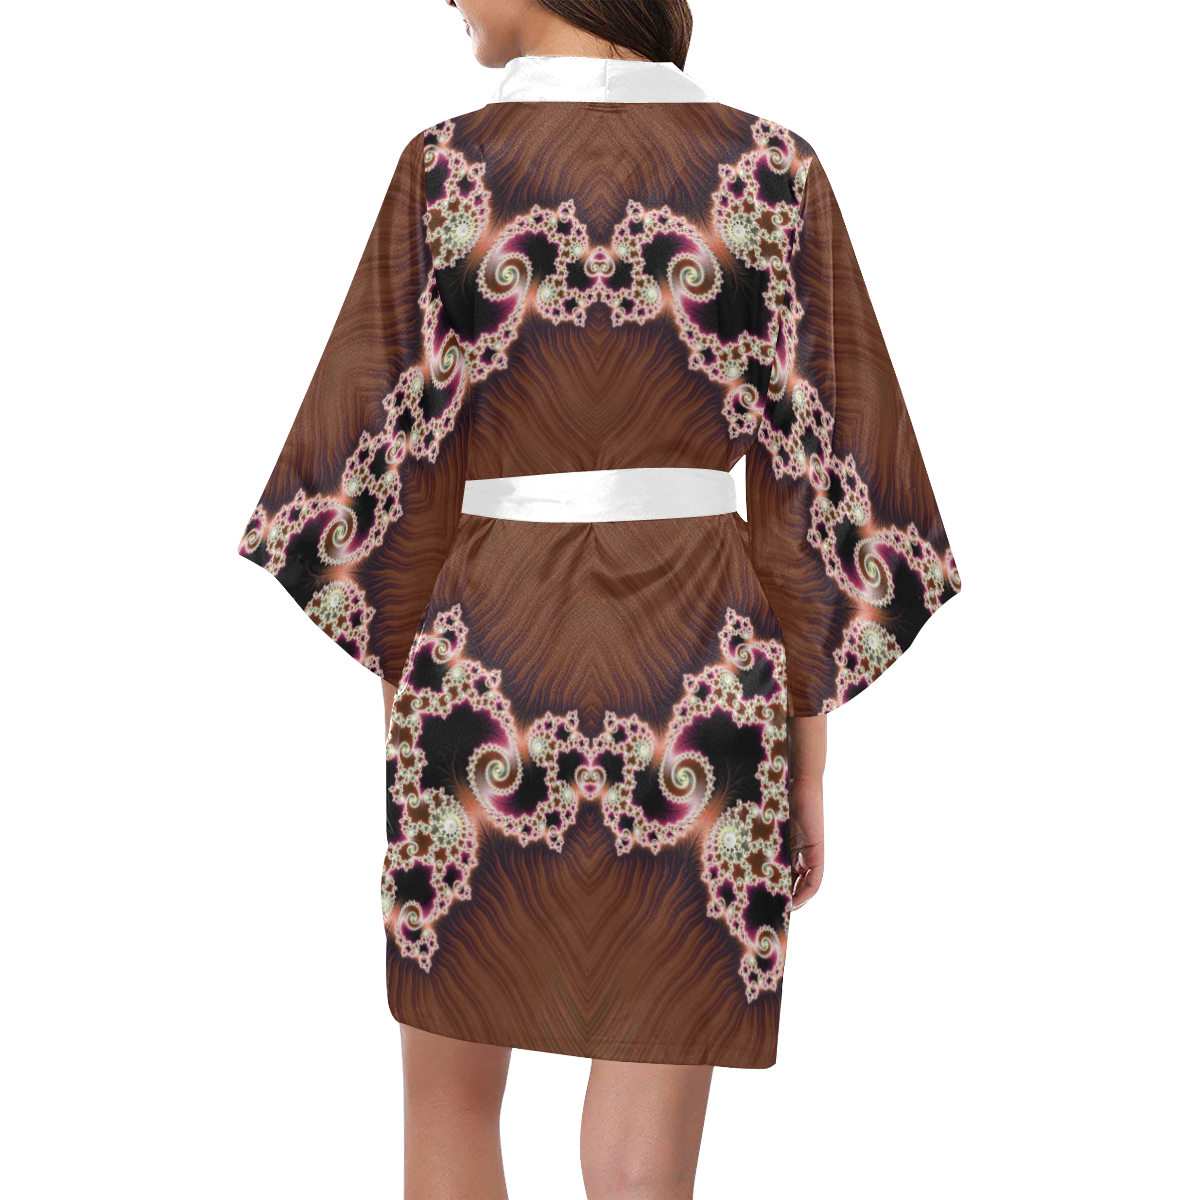 Copper and Pink Hearts Lace Fractal Abstract Kimono Robe